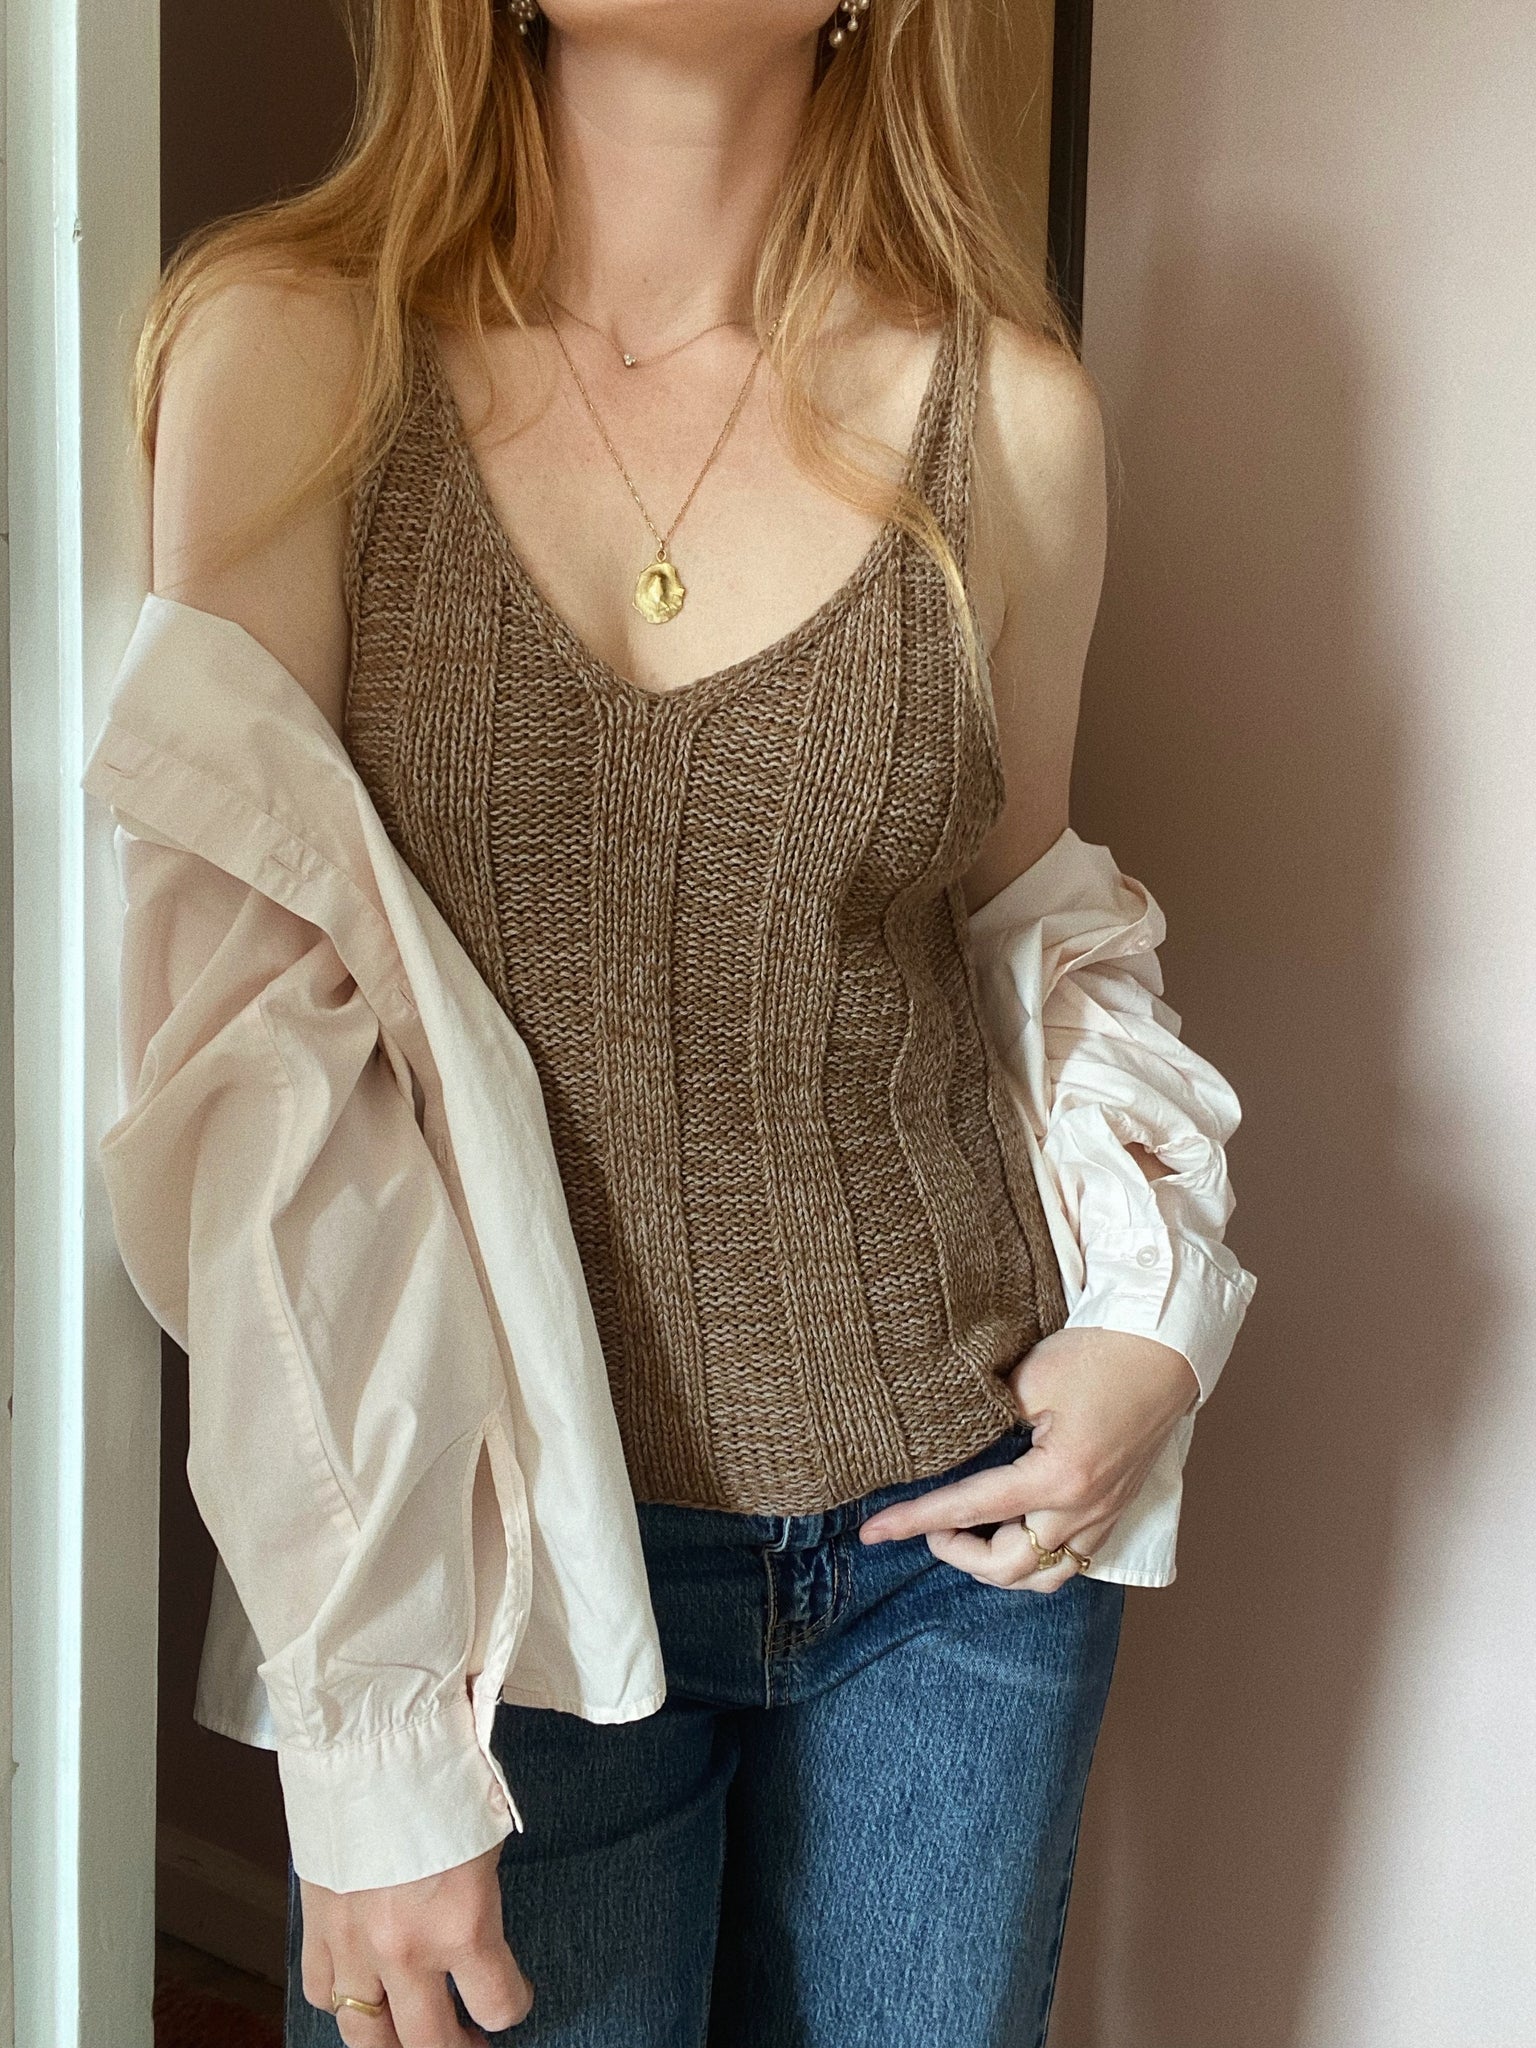 Camisole No. 6 - Knitting Pattern in English – • MY FAVOURITE THINGS •  KNITWEAR